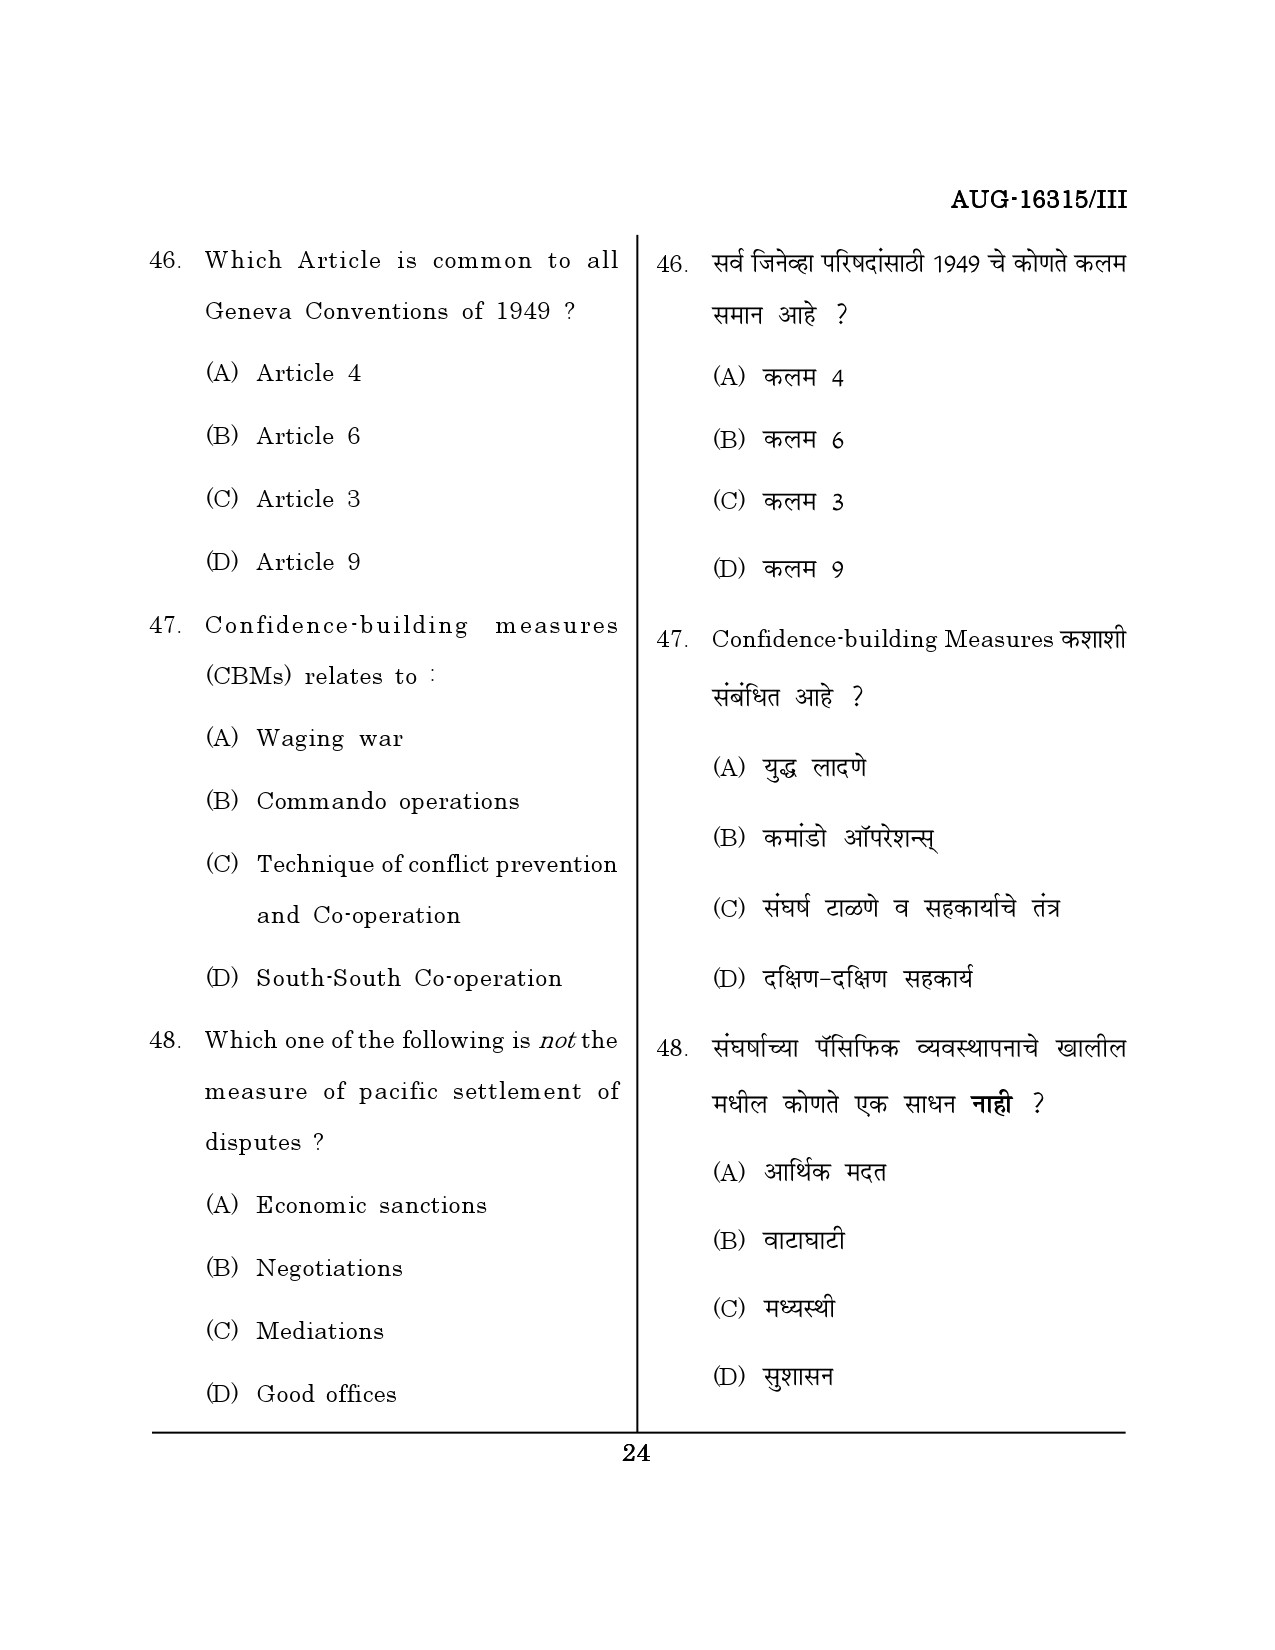 Maharashtra SET Defence and Strategic Studies Question Paper III August 2015 23